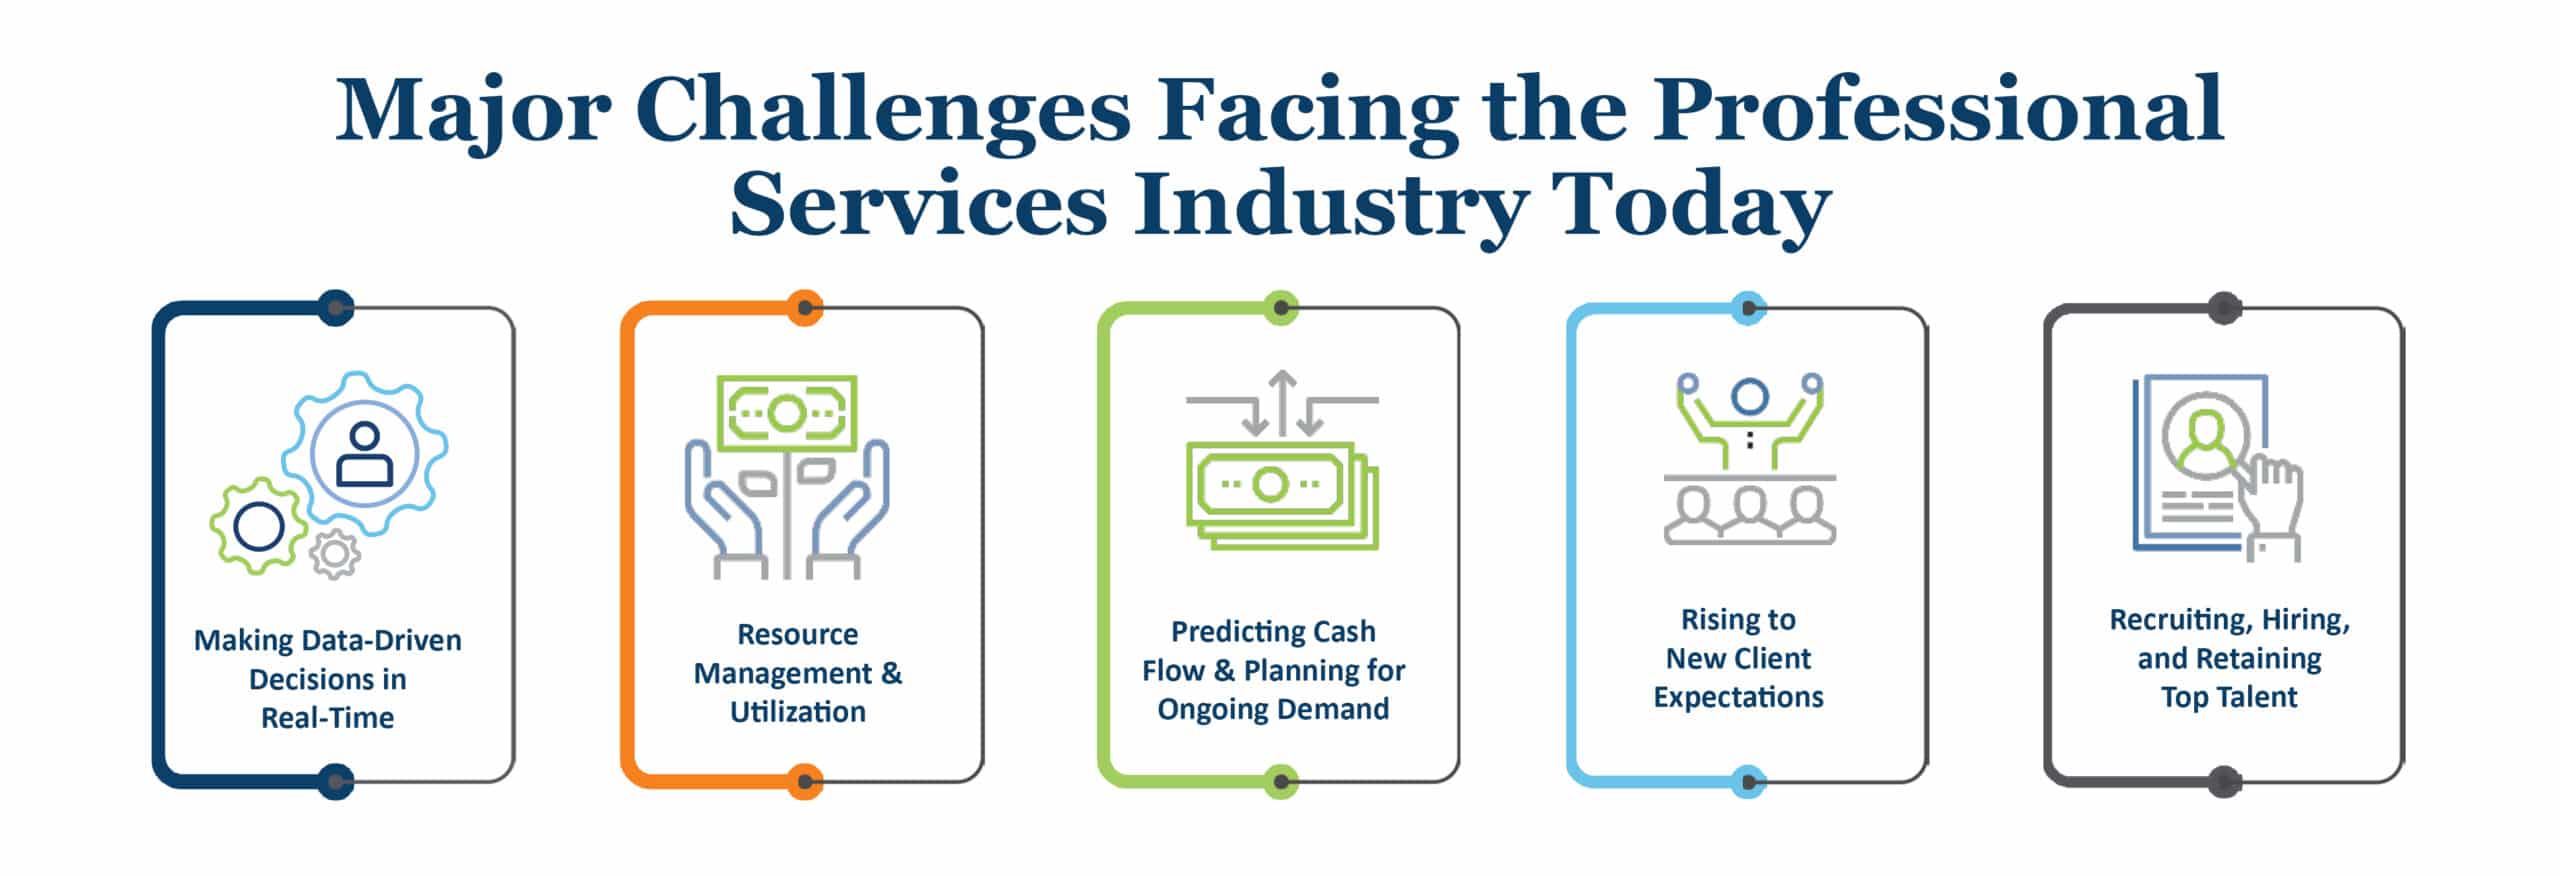 Major Challenges Facing the Professional Services Industry Today